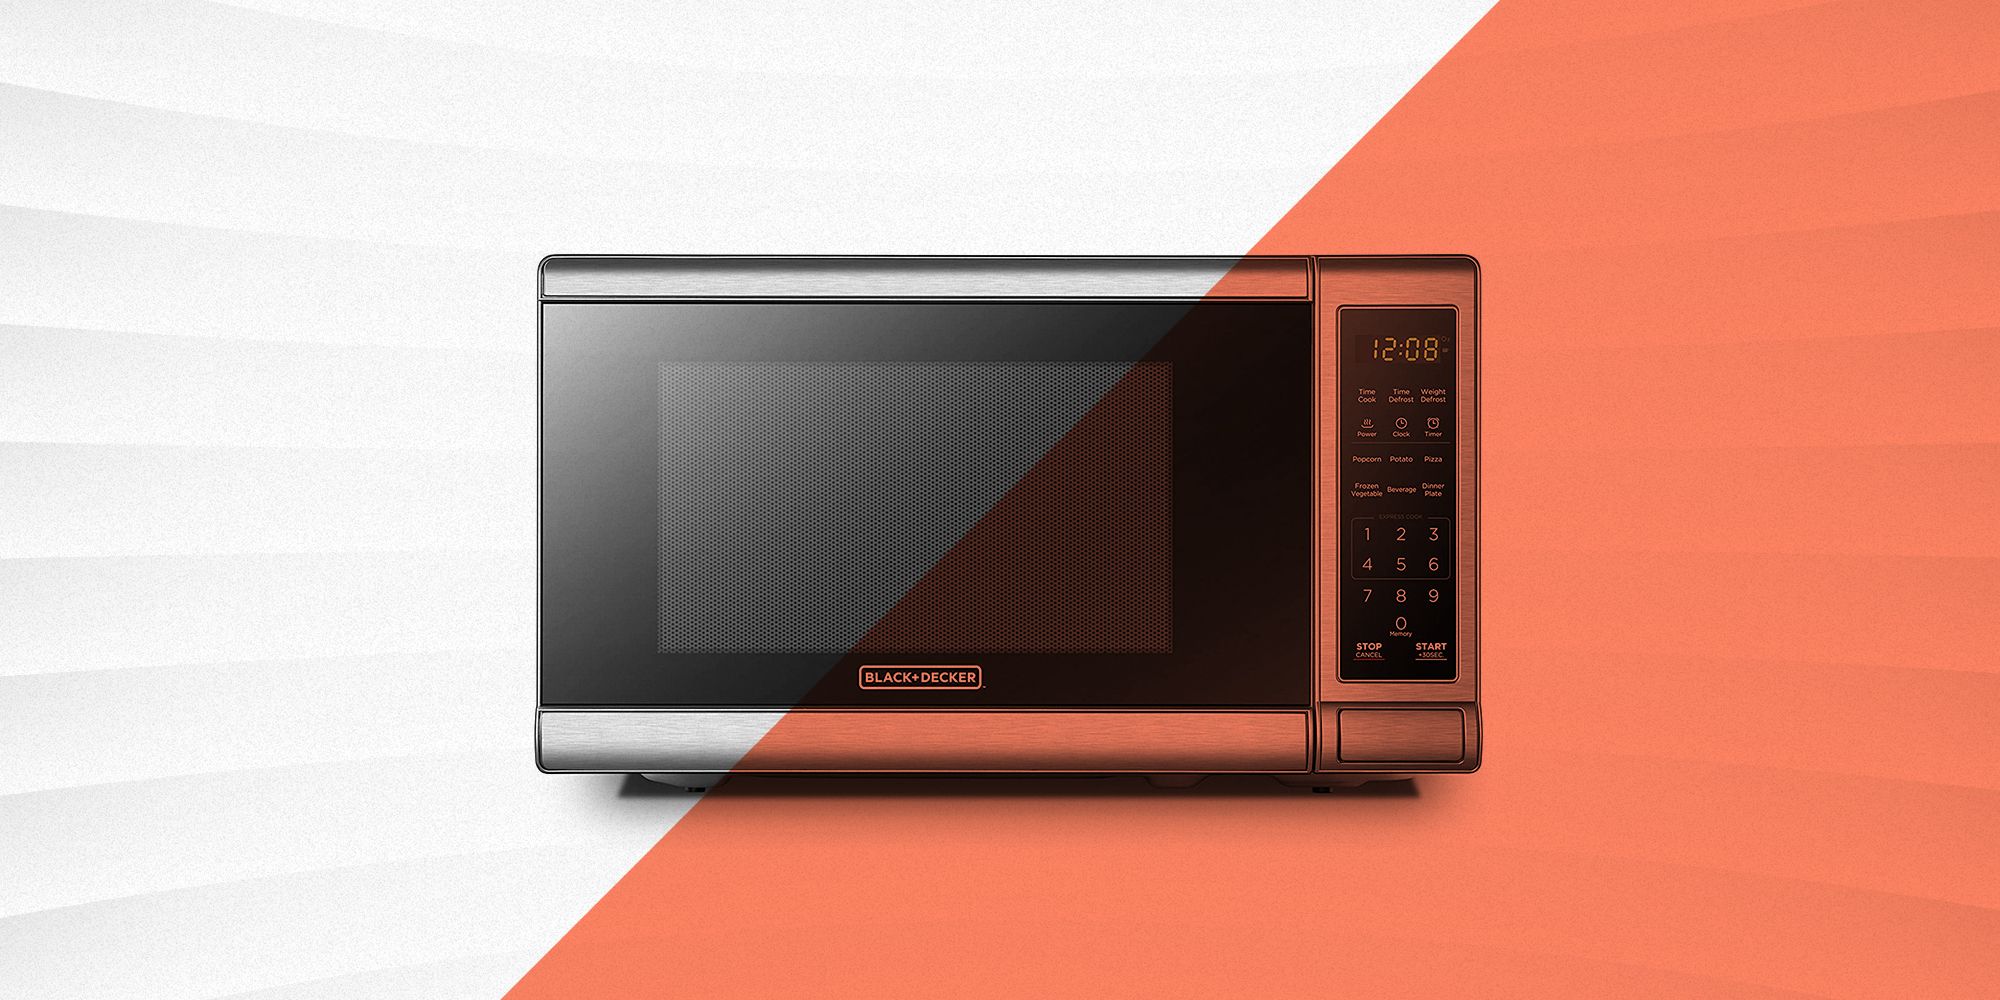 who was the original inventor of the microwave?